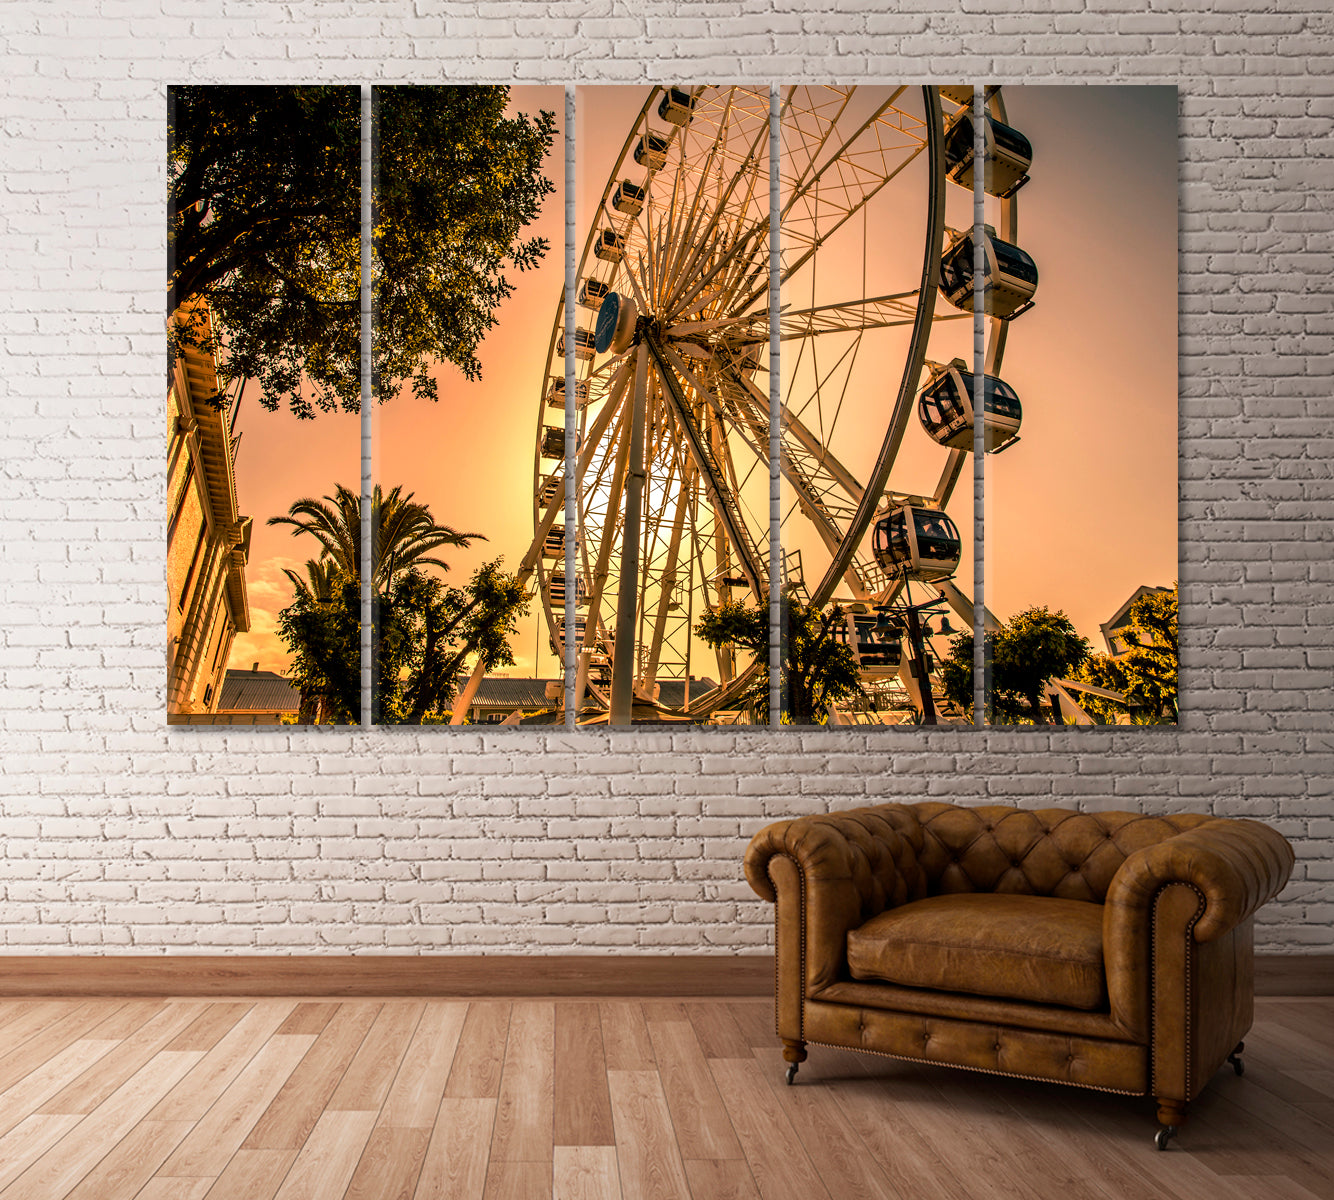 Cape Wheel in Cape Town South Africa Canvas Print ArtLexy 5 Panels 36"x24" inches 